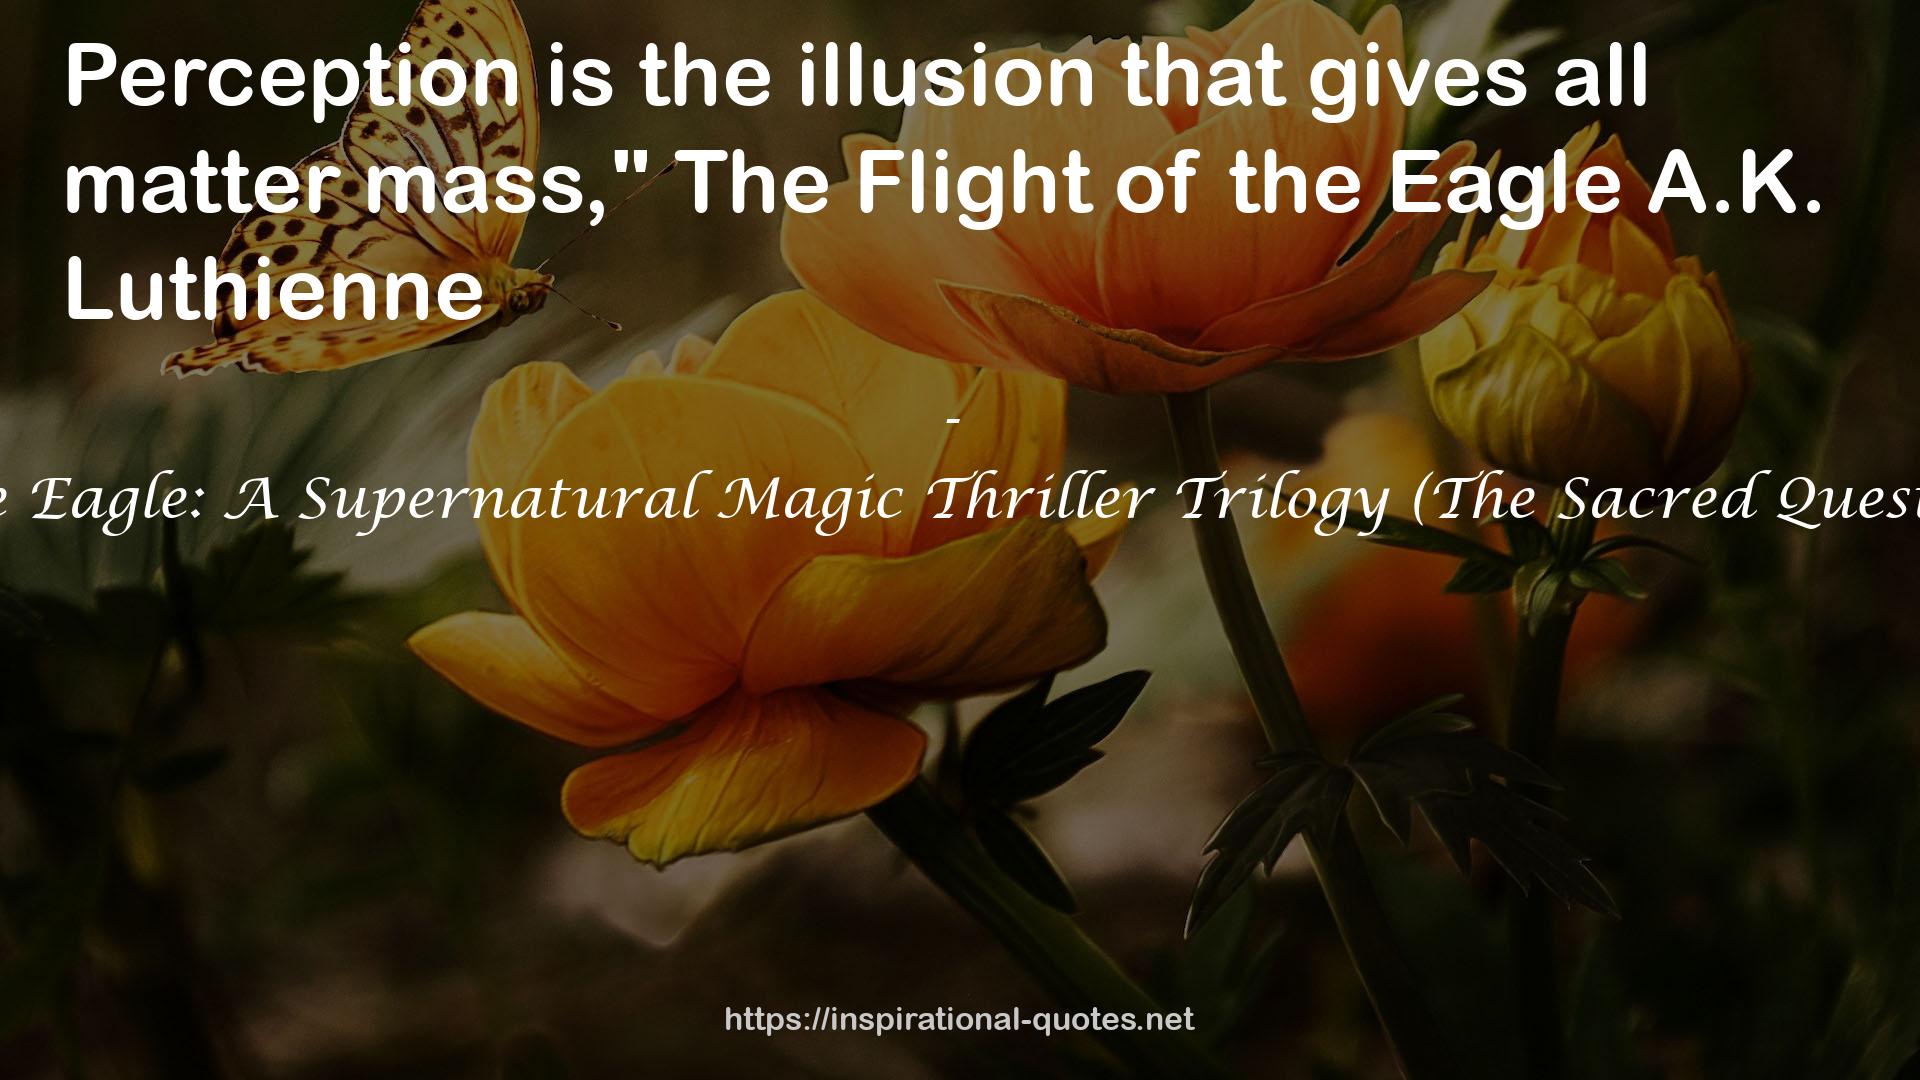 Flight of the Eagle: A Supernatural Magic Thriller Trilogy (The Sacred Quest Trilogy #2) QUOTES